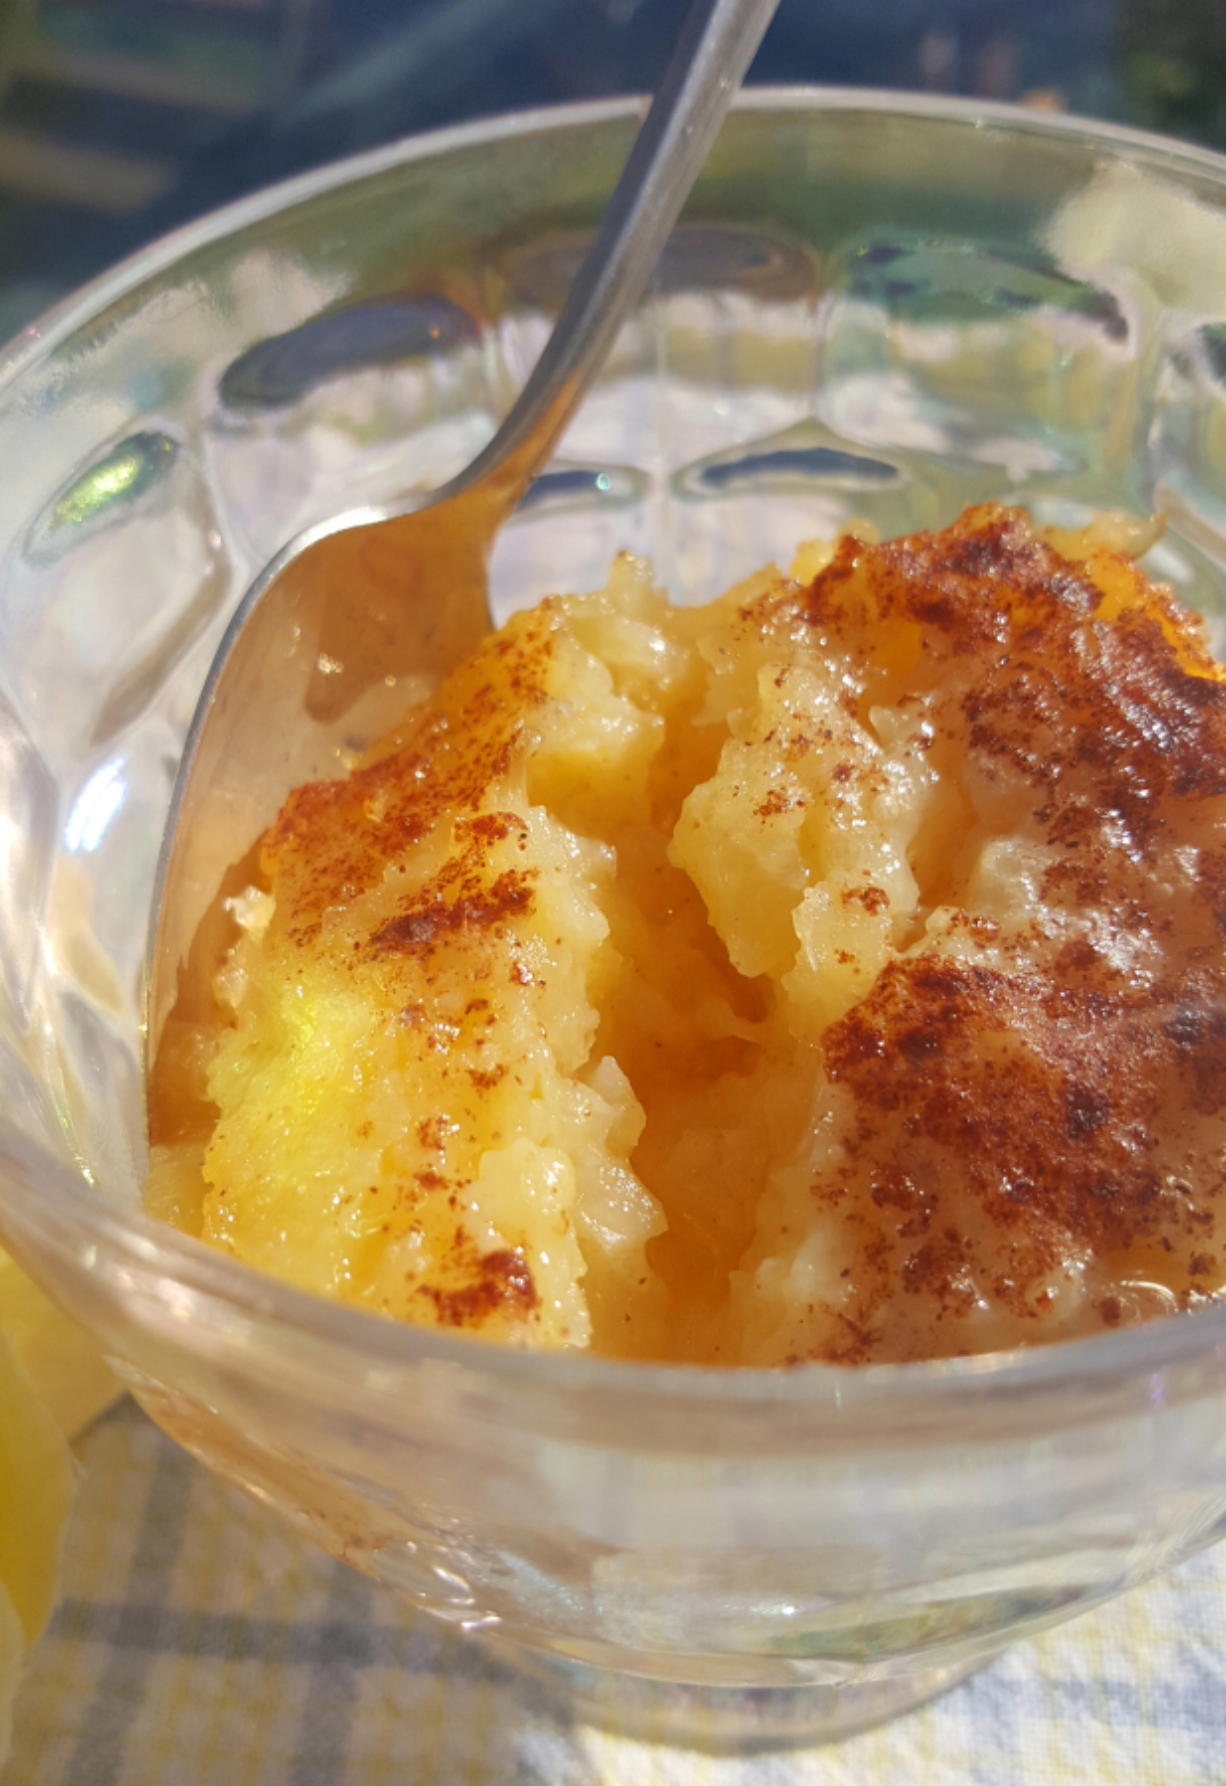 This easy recipe for baked pineapple uses only a few ingredients and can be served as a side dish or a quick dessert.